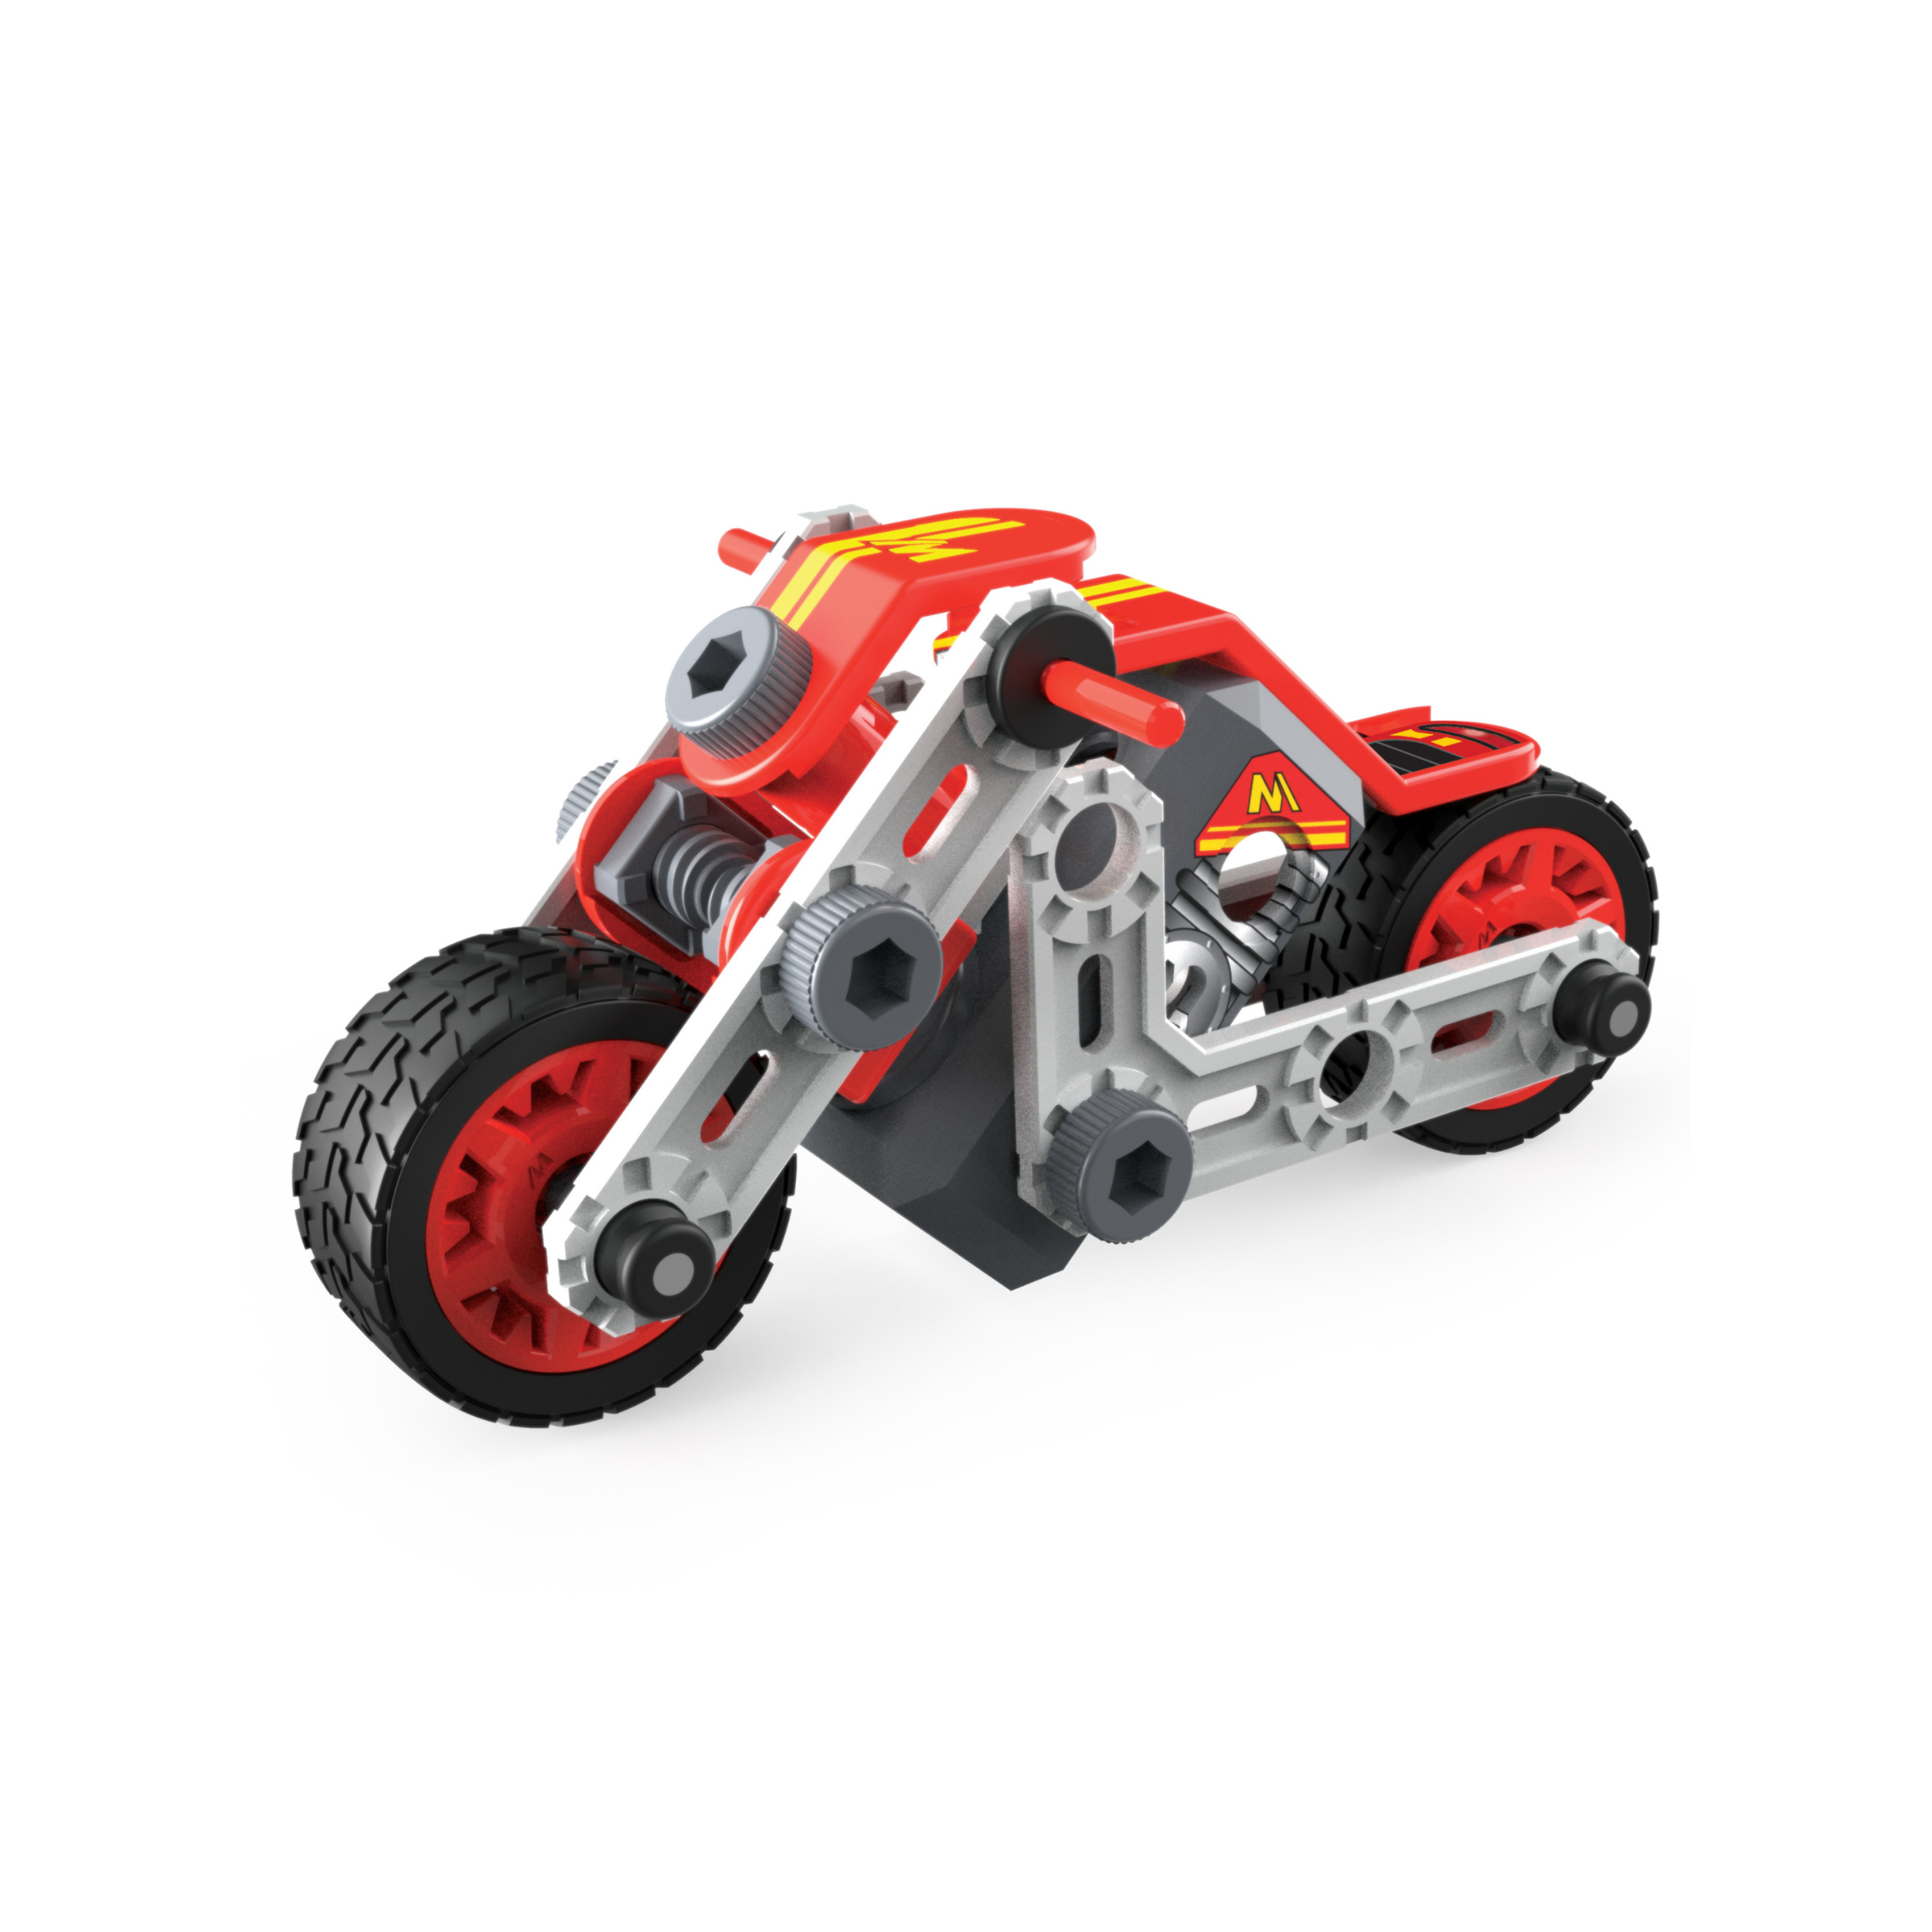 SPIN MASTER - MECCANO JUNIOR - Build Your Own Adventure with Meccano Assorted Vehicles